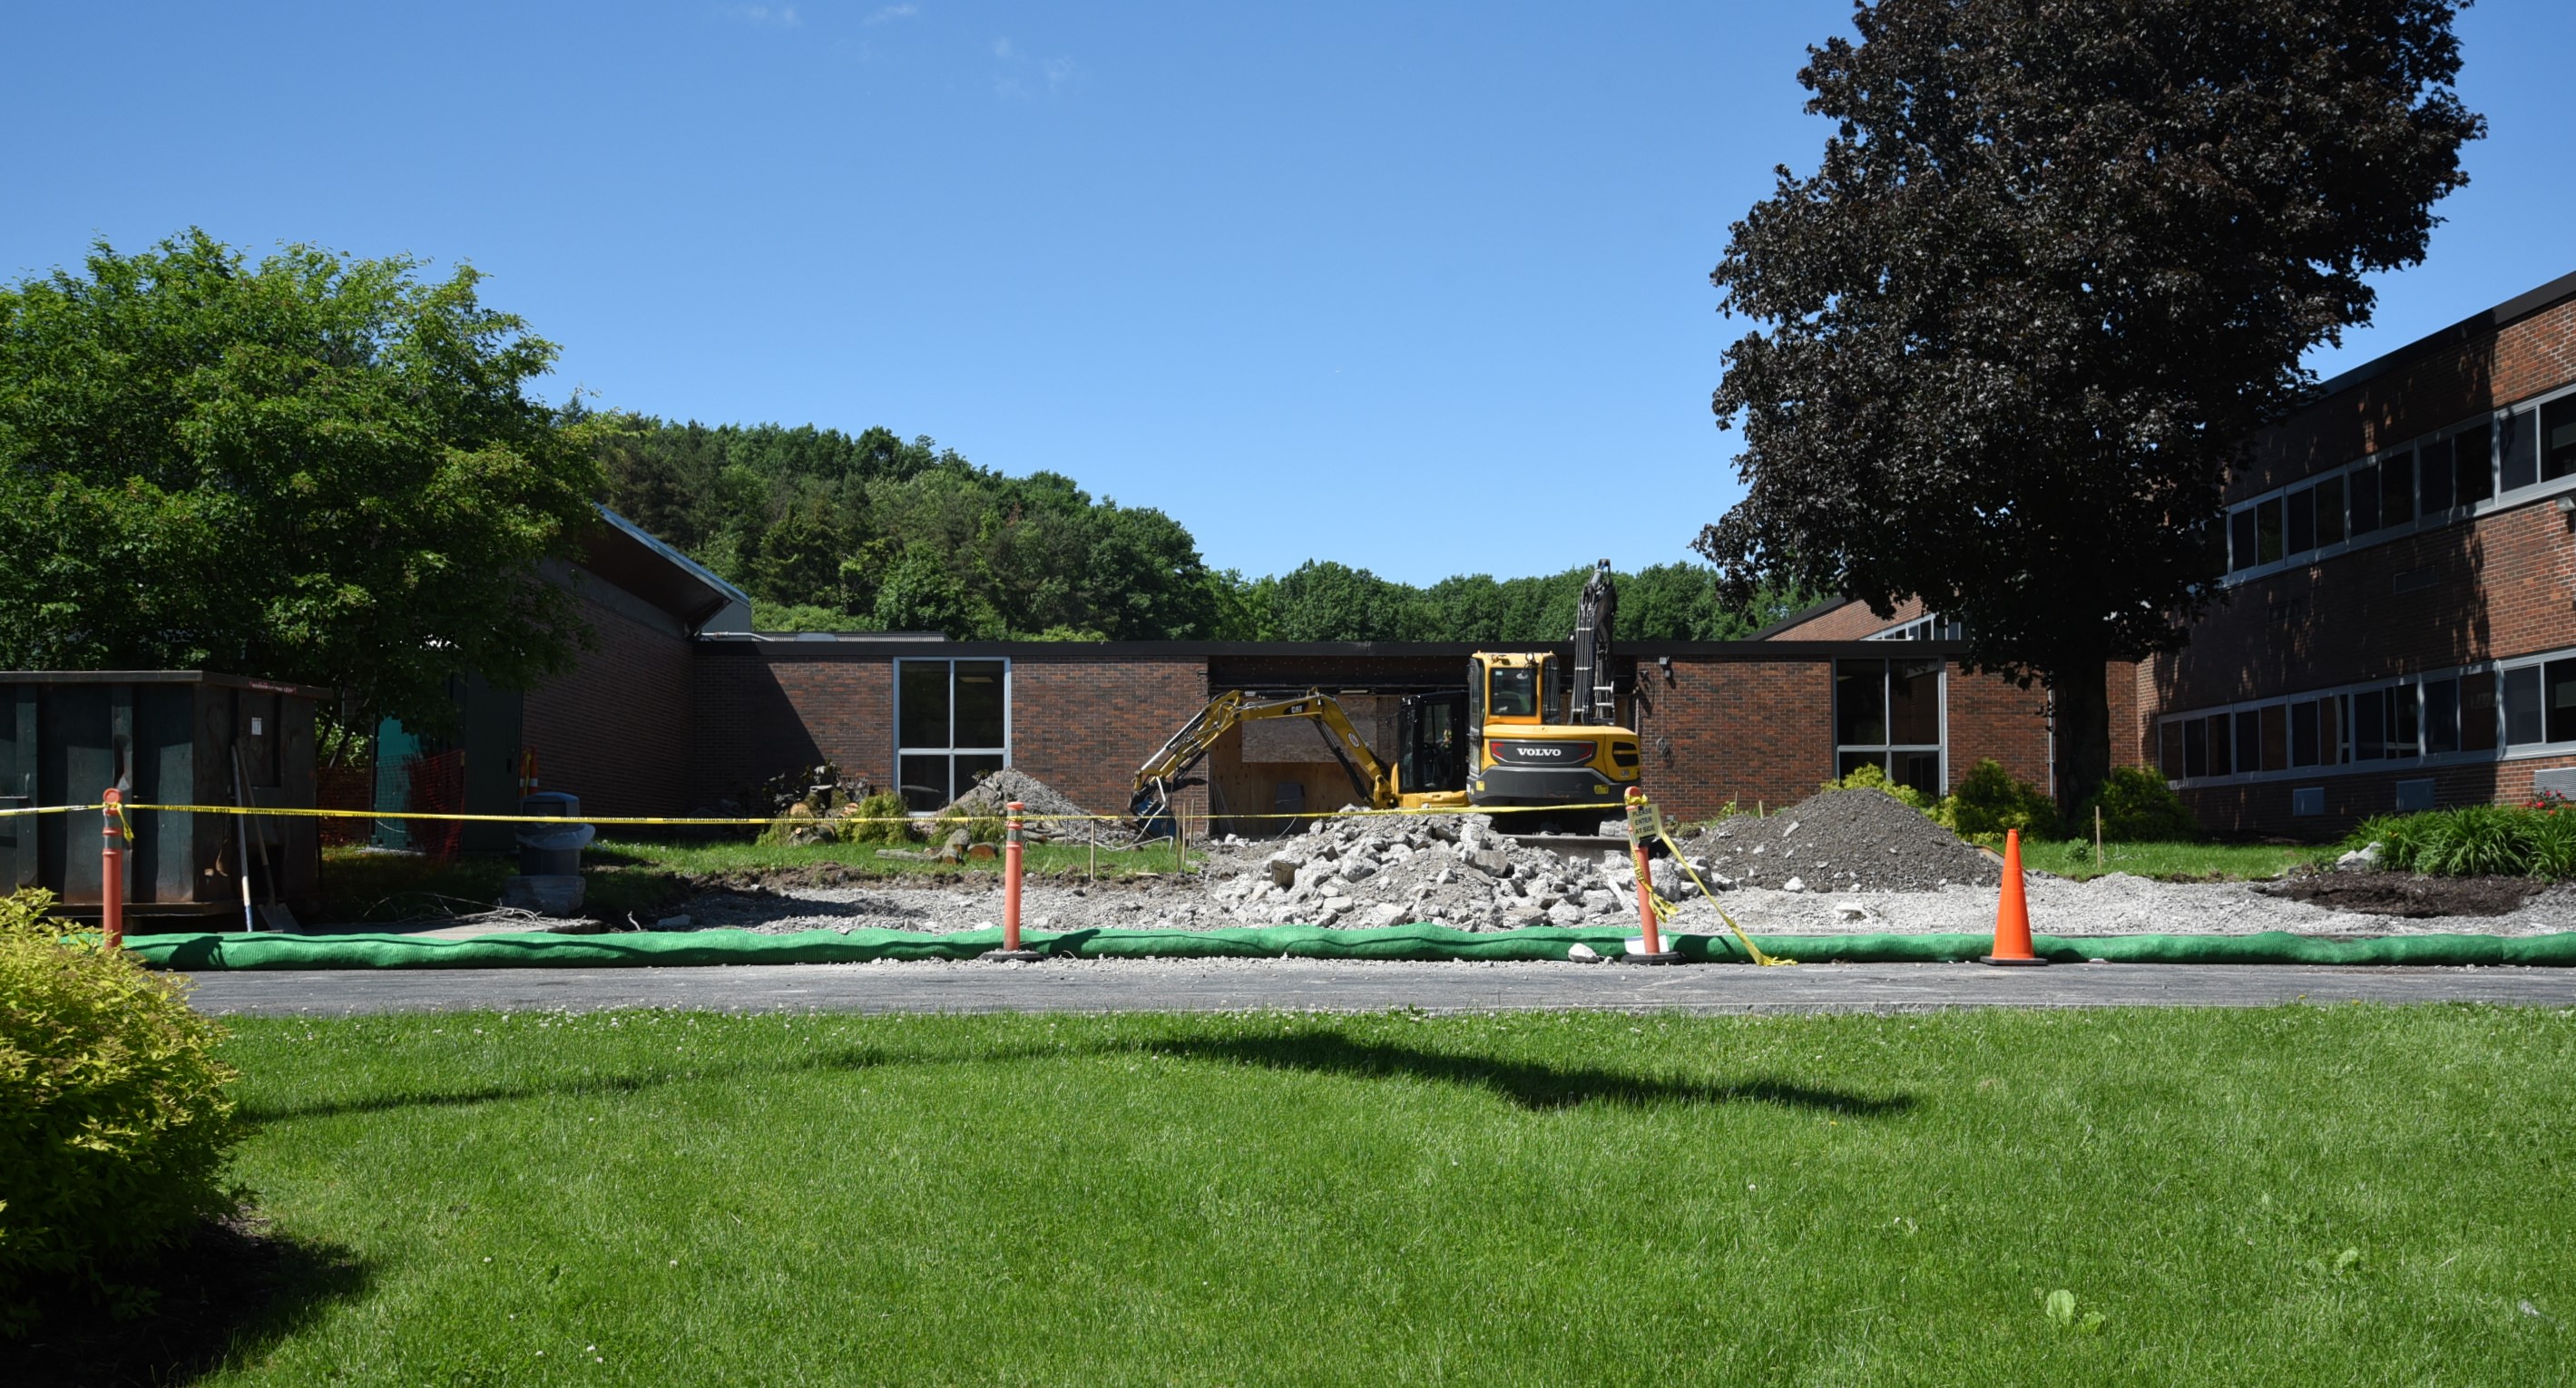 Front of school during construction (shot straight on far away)